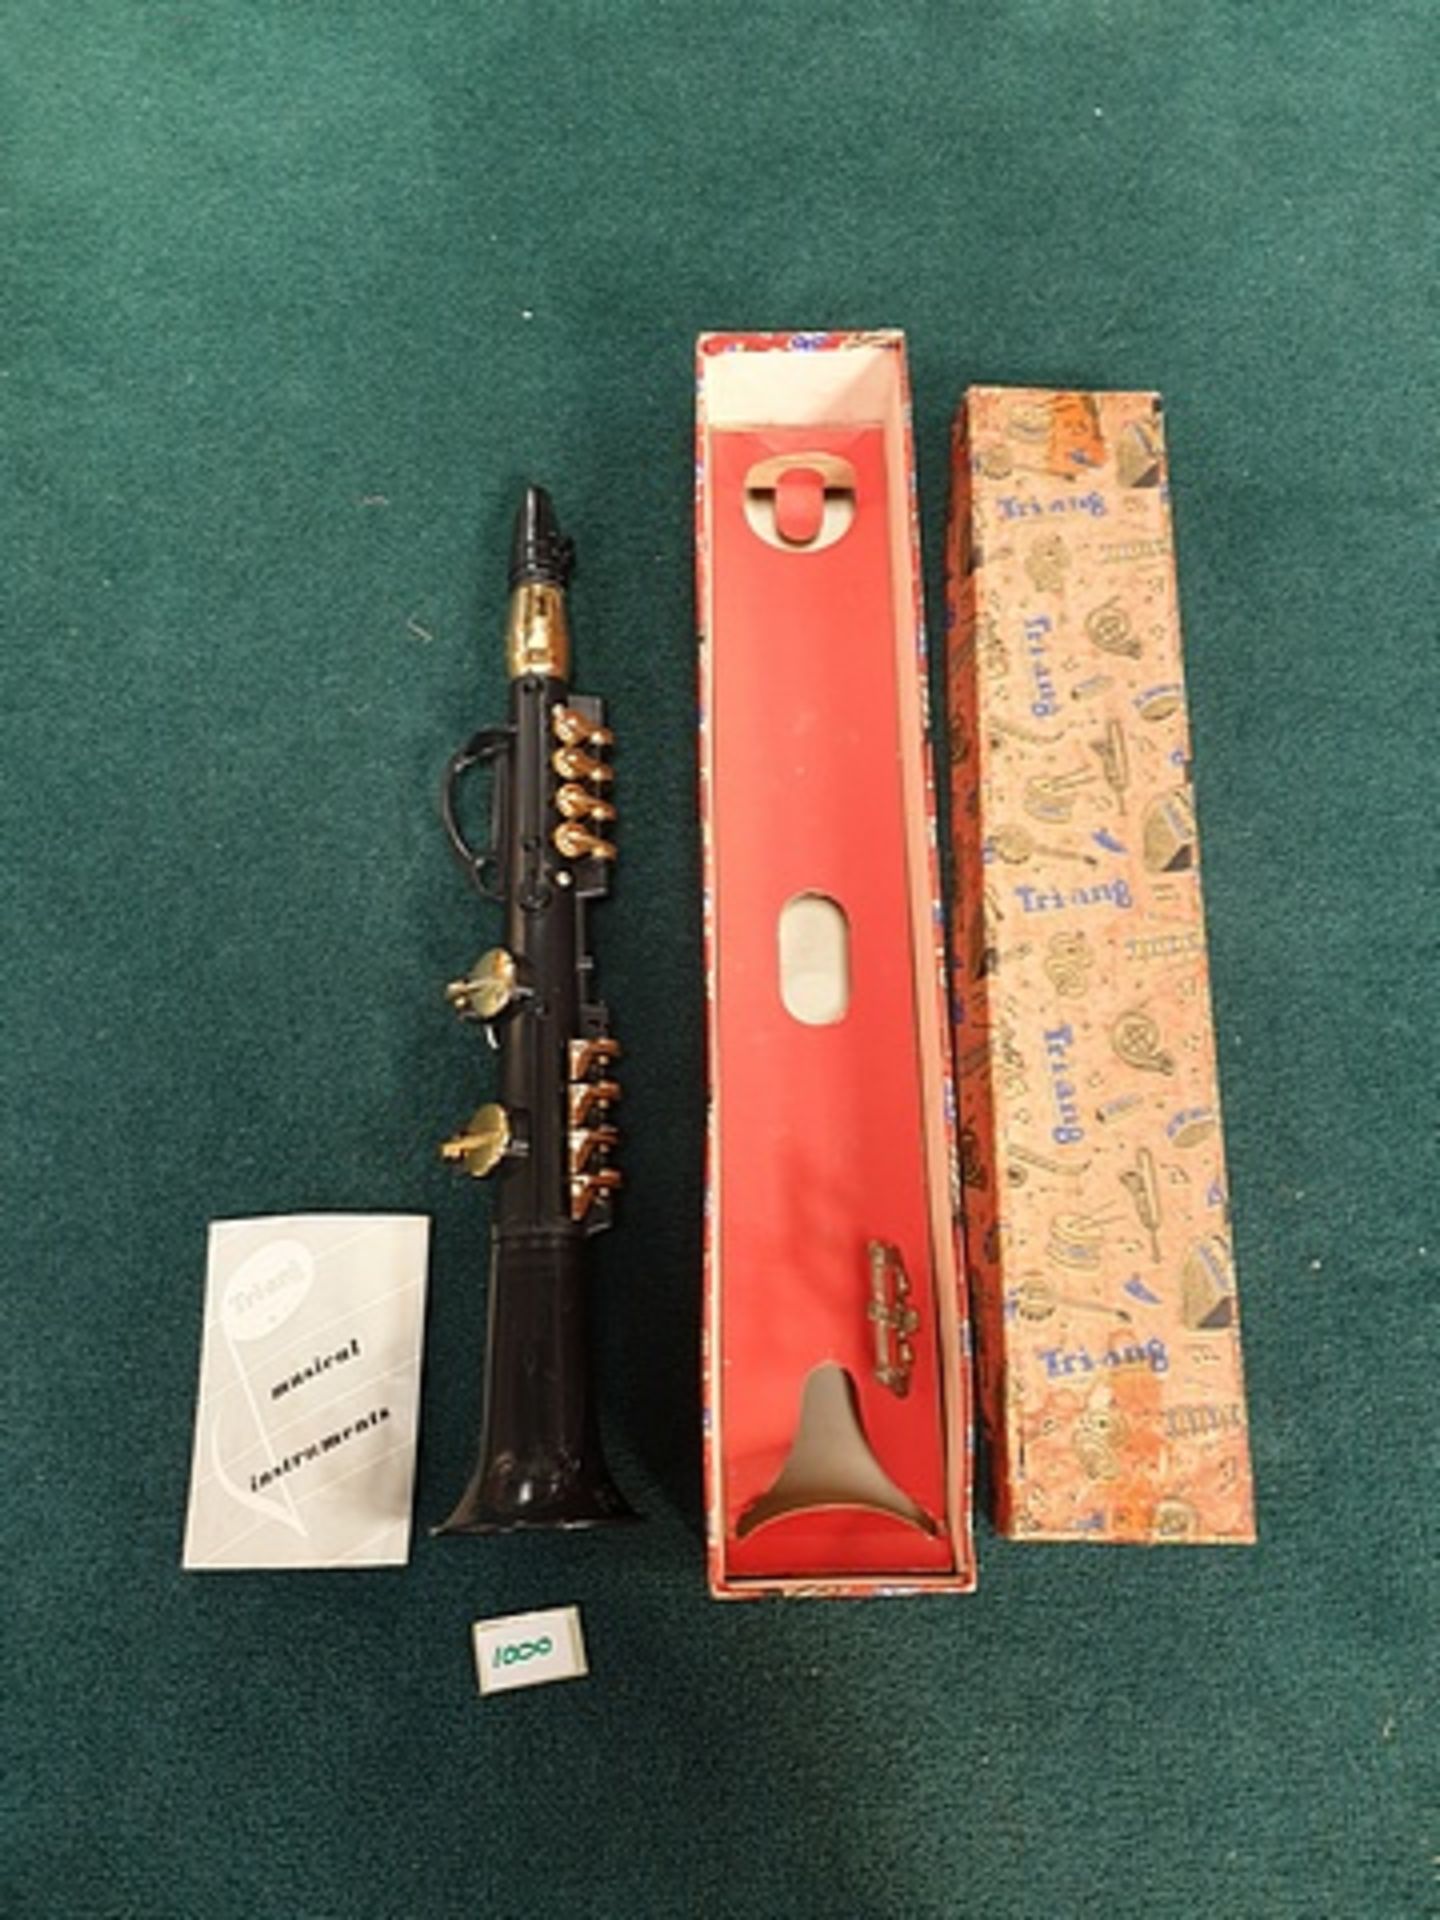 Tri-Ang Clarinet Complete With Box - Image 2 of 2